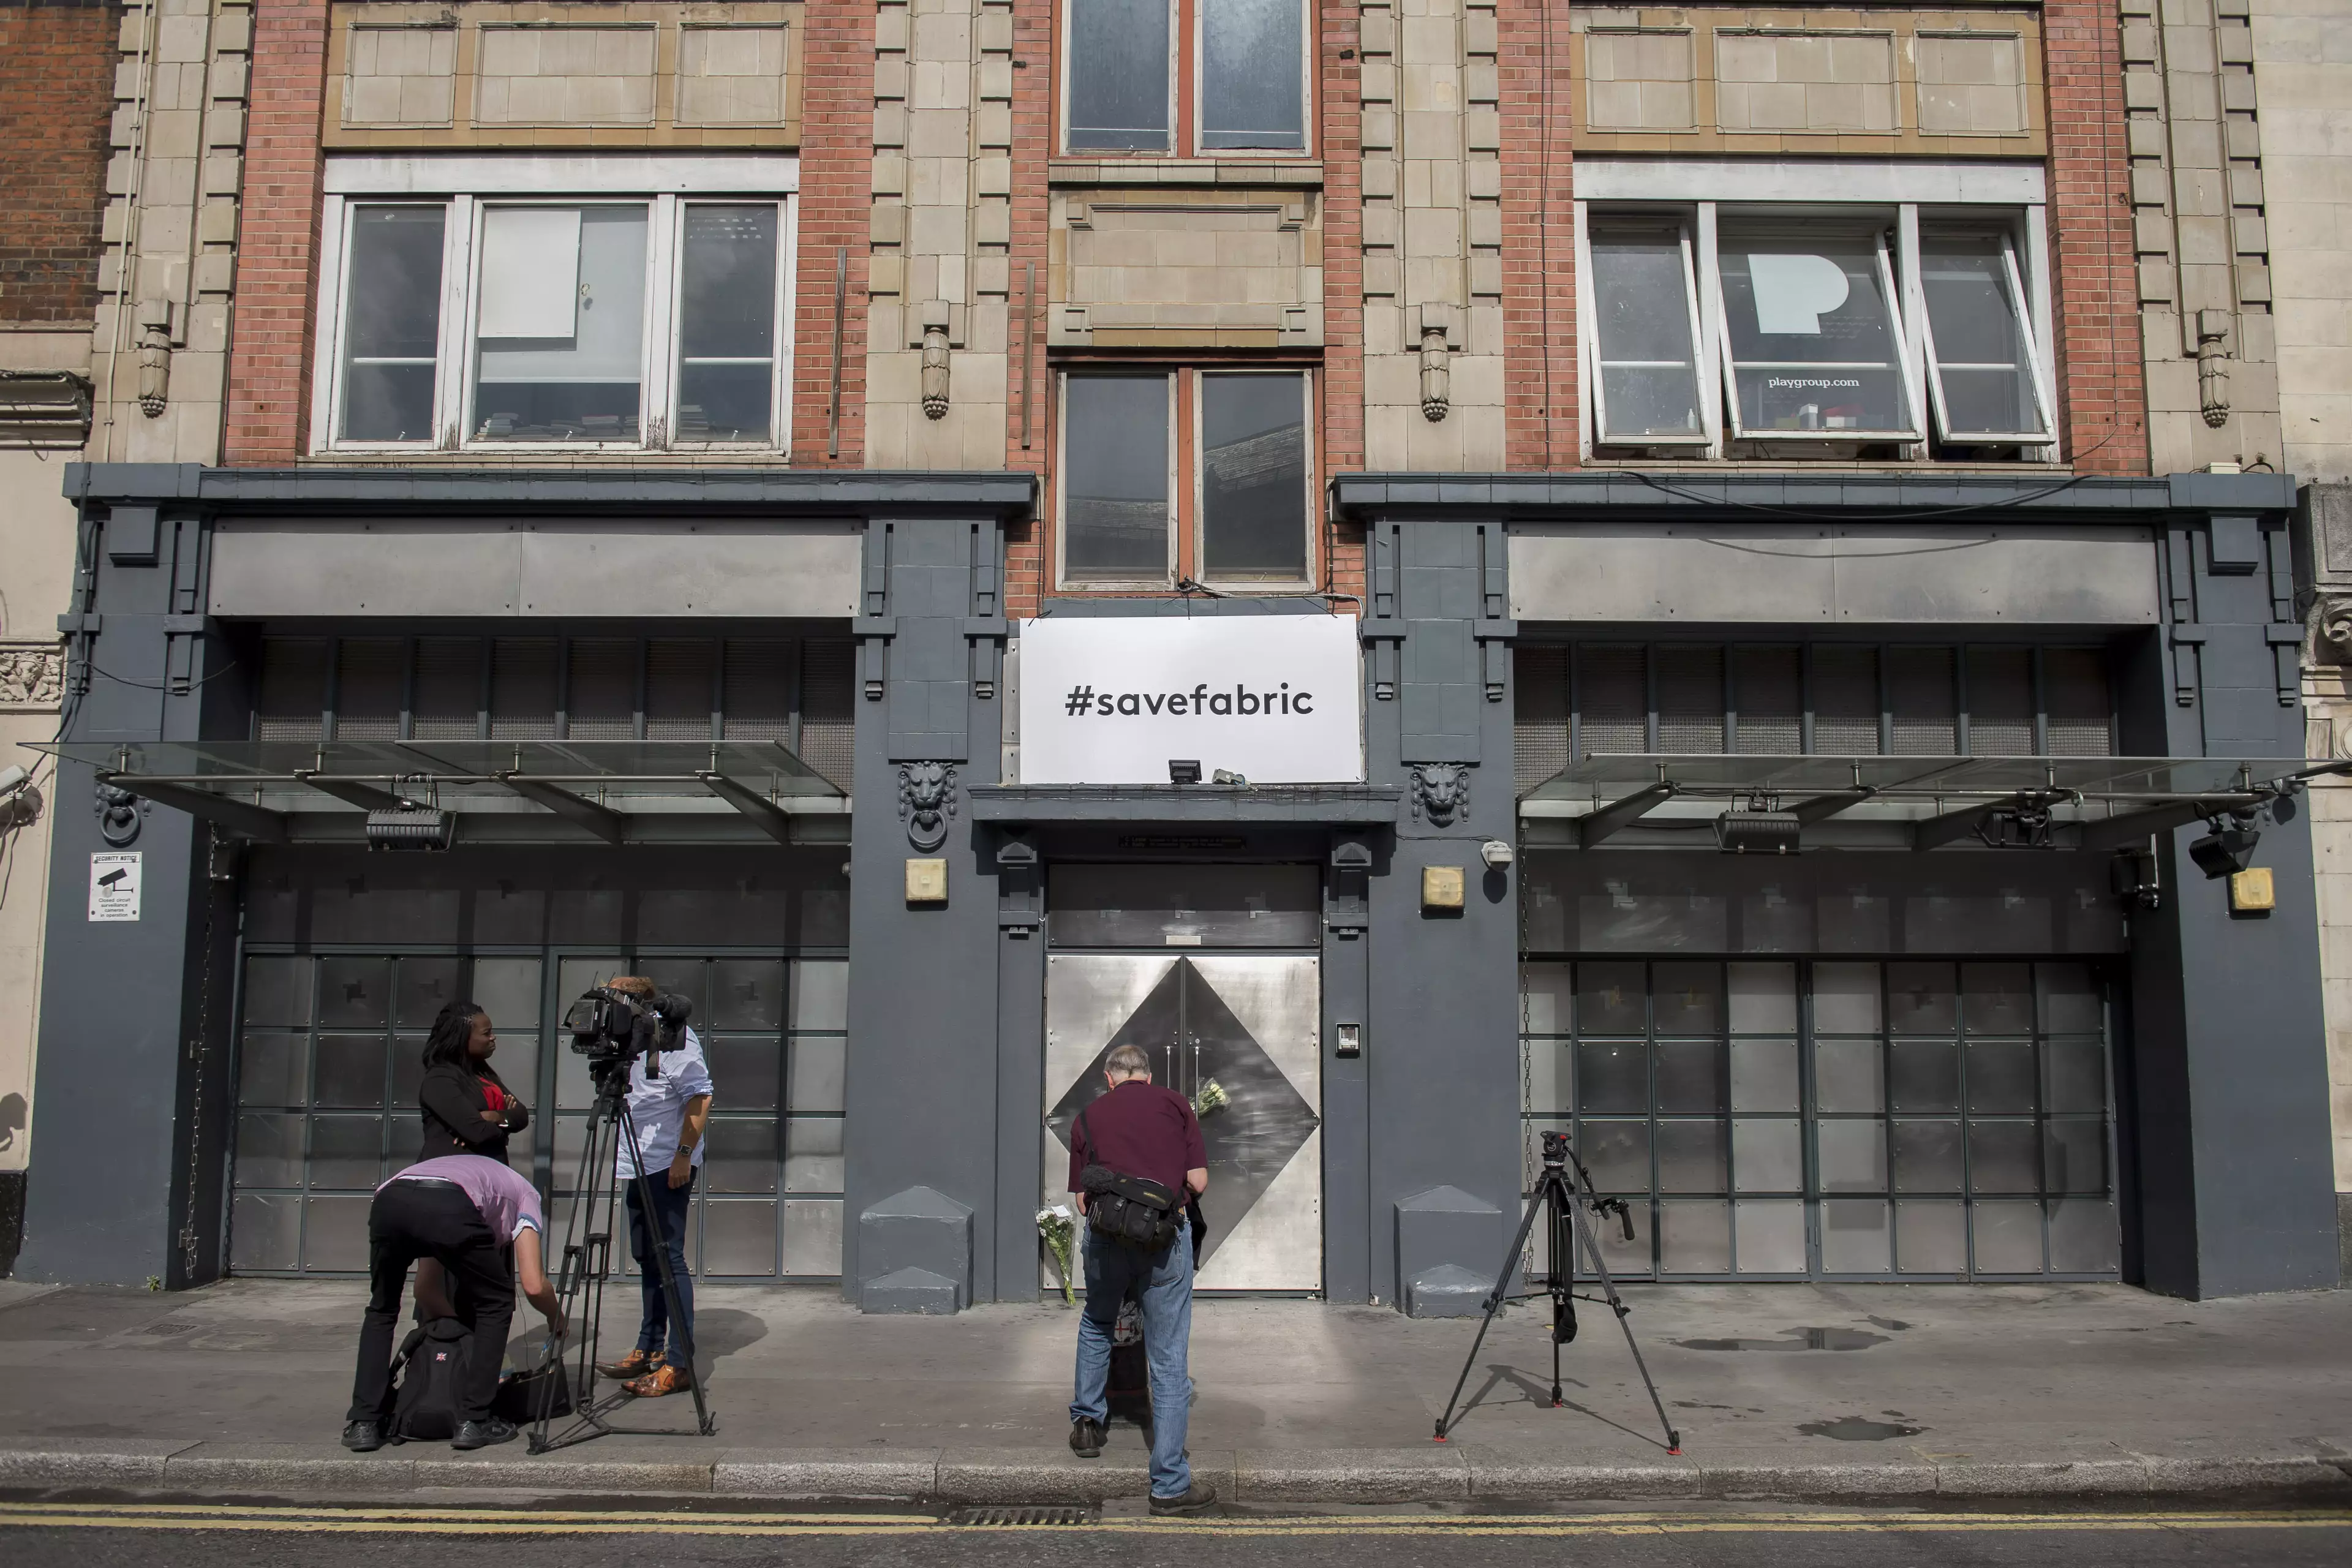 There's An Alleged 'Real Reason' As To Why London's 'Fabric' Nightclub Was Closed 